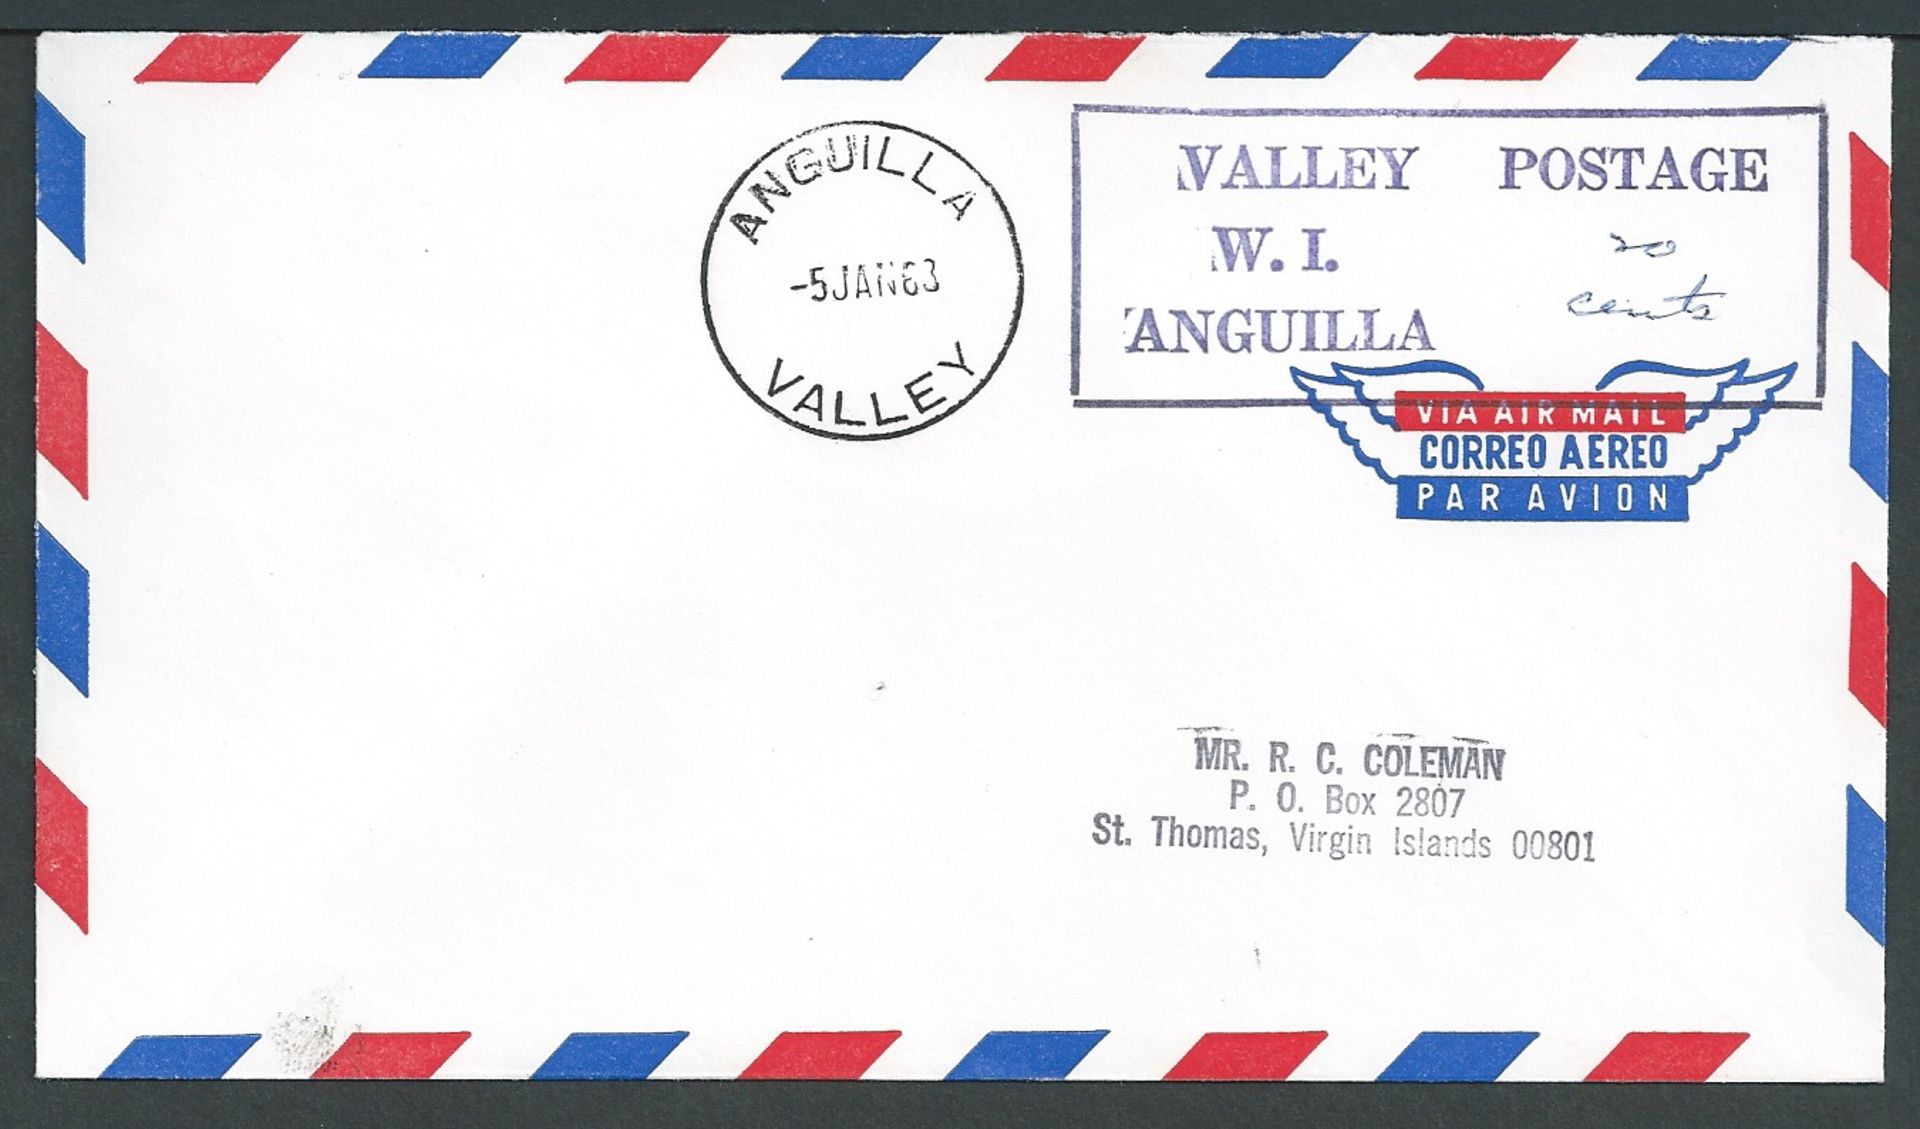 Anguilla 1968 Covers to the U.S. Virgin Island with boxed "VALLEY POSTAGE/W.I./ANGUILLA" - Image 3 of 4